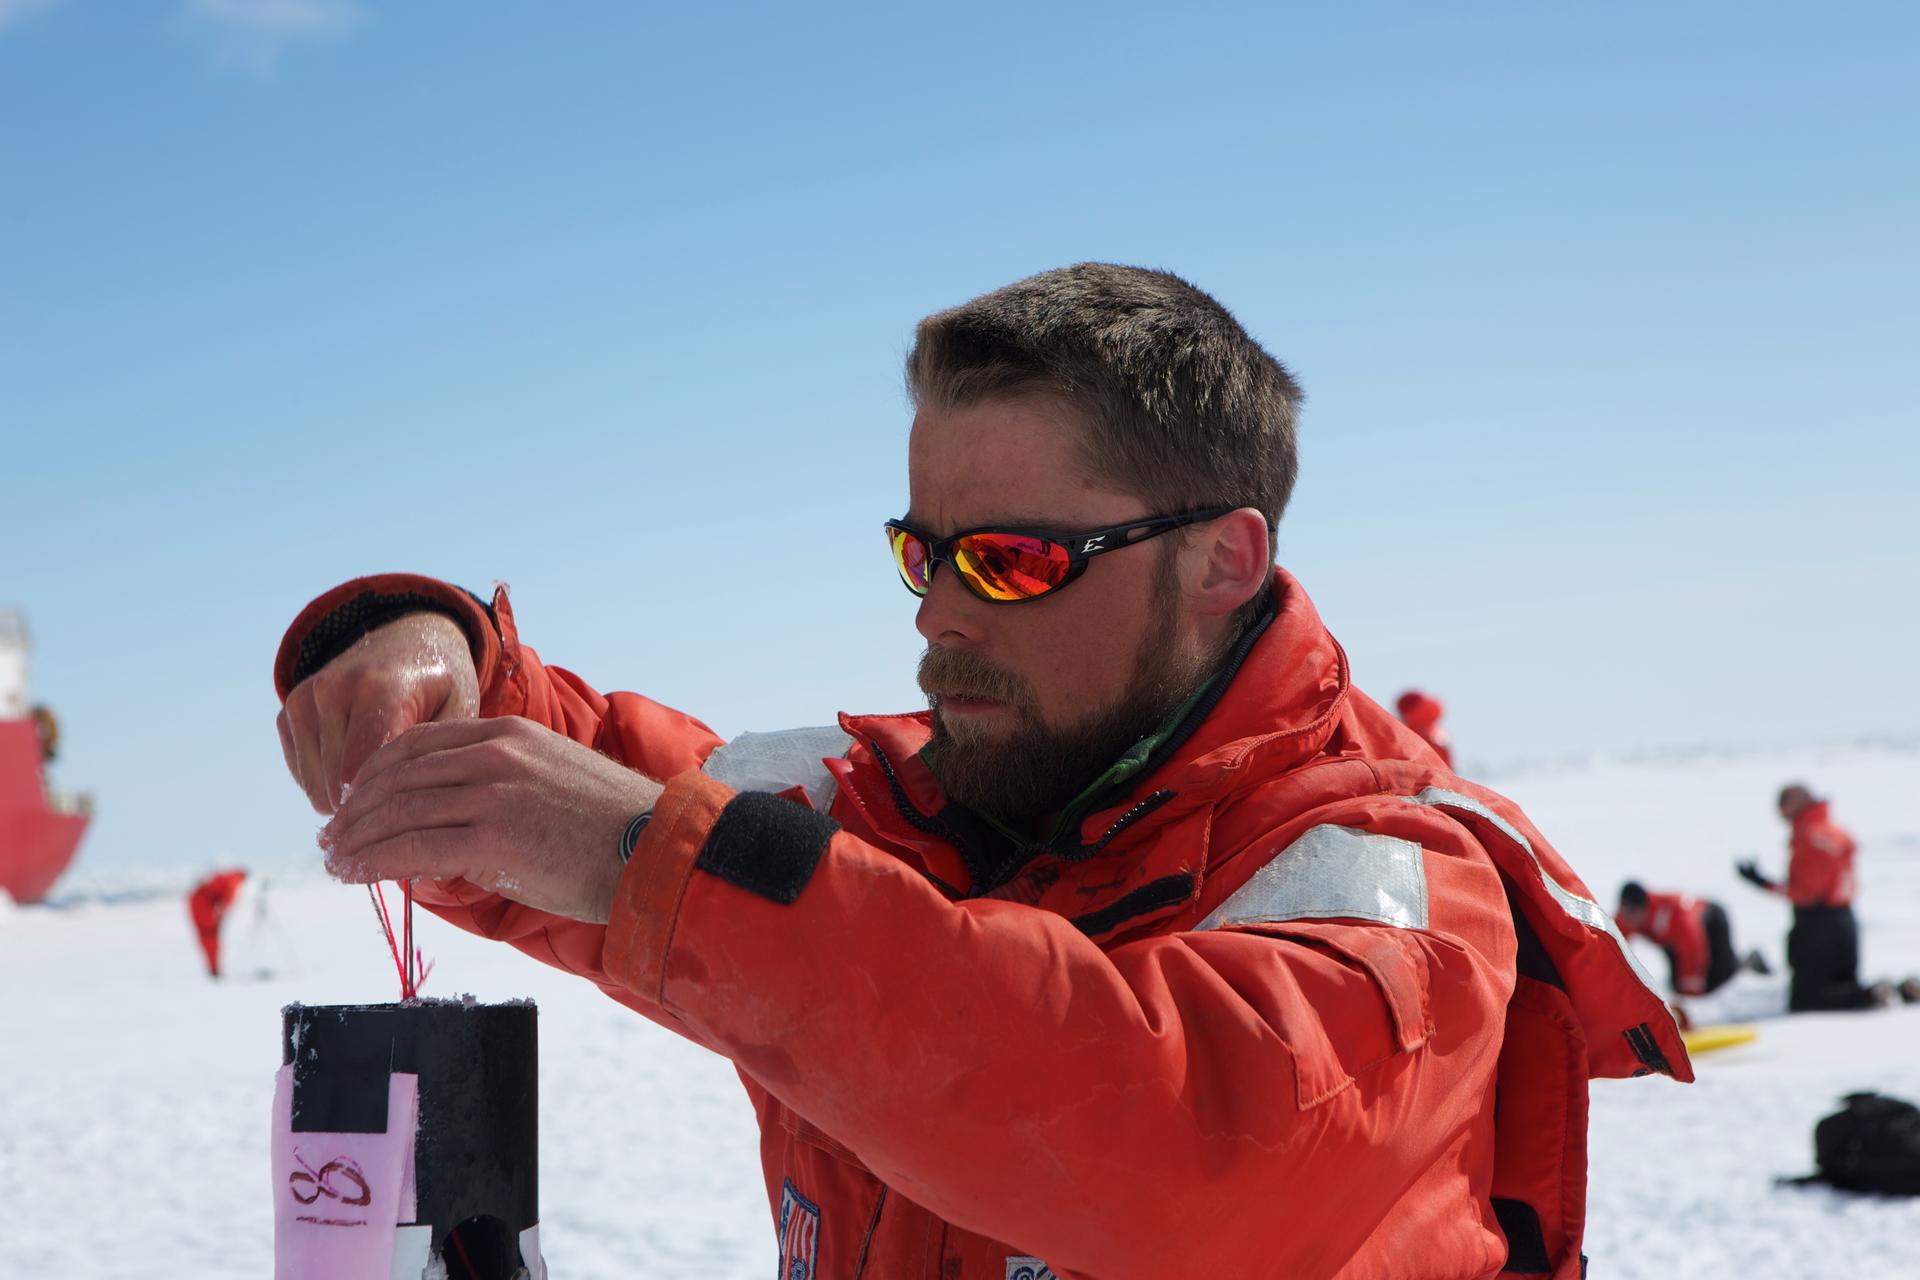 Geophysicist Chris Polashenski drops a pressure sensor into a plastic tube that he's using for his research into melt ponds that form on the Arctic ice every spring.